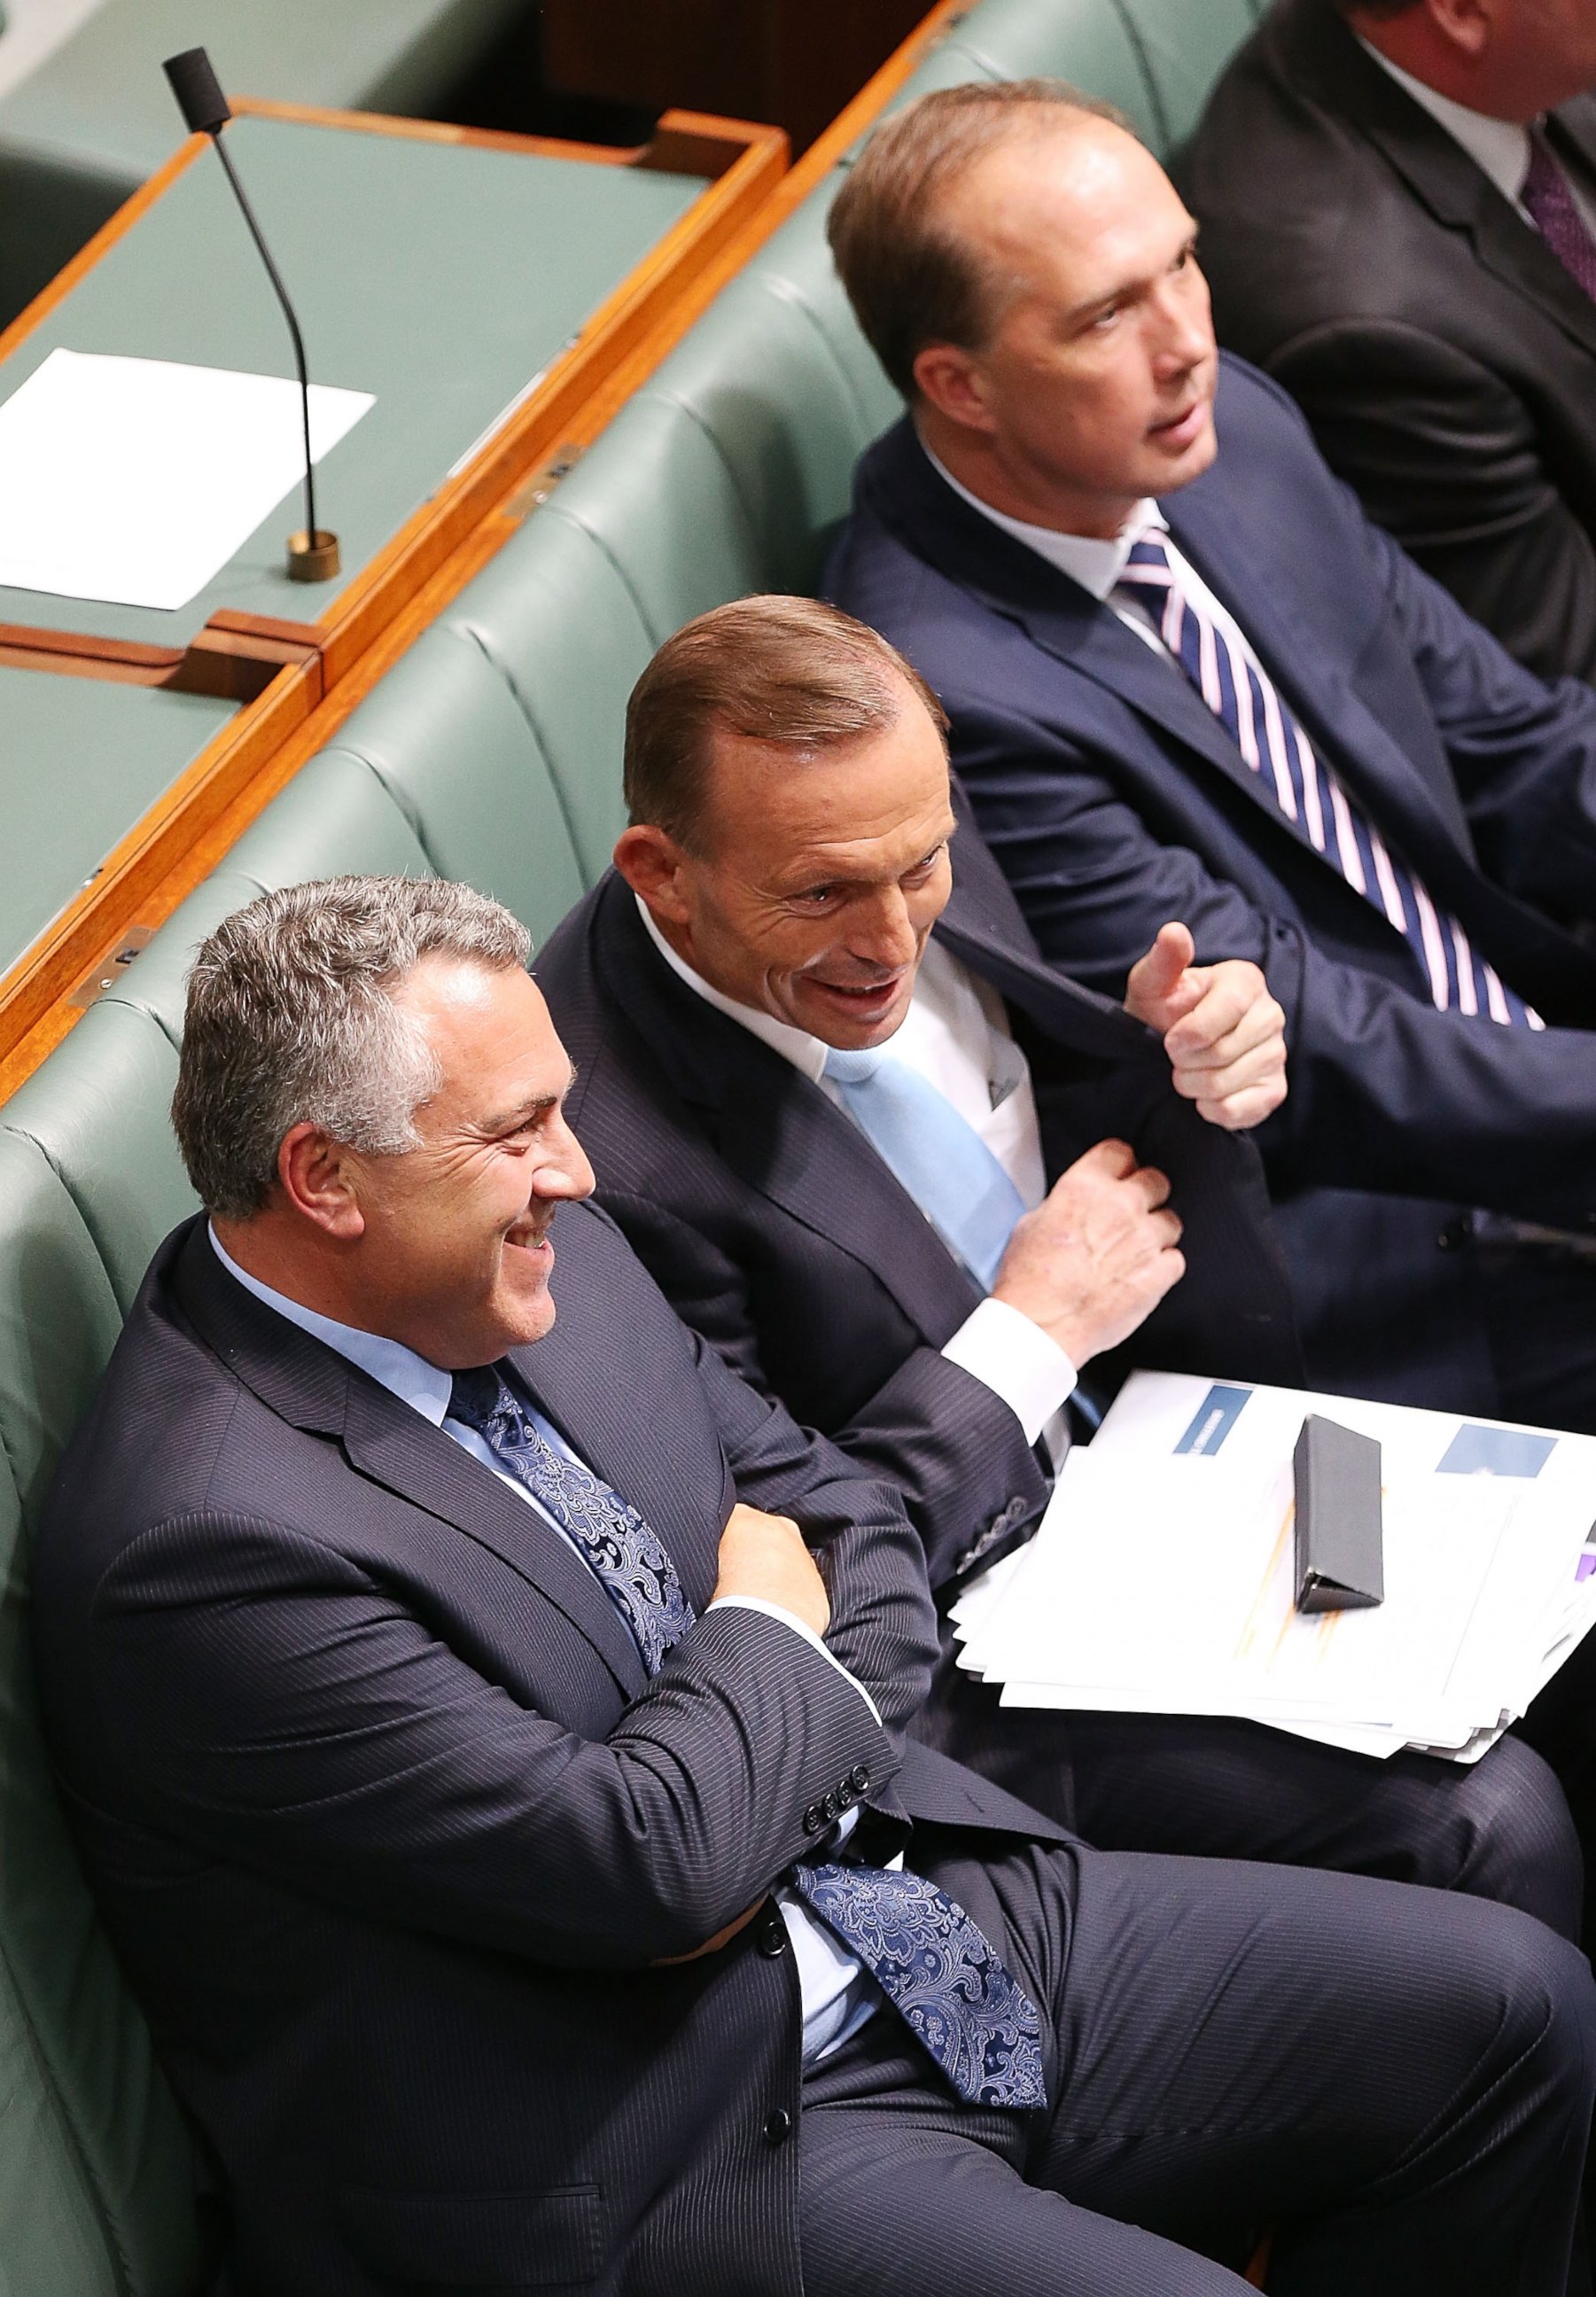 PHOTO: Tony Abbott, Joe Hockey and Peter Dutton are seen at the Parliament House, Feb. 9, 2015, in Canberra, Australia.